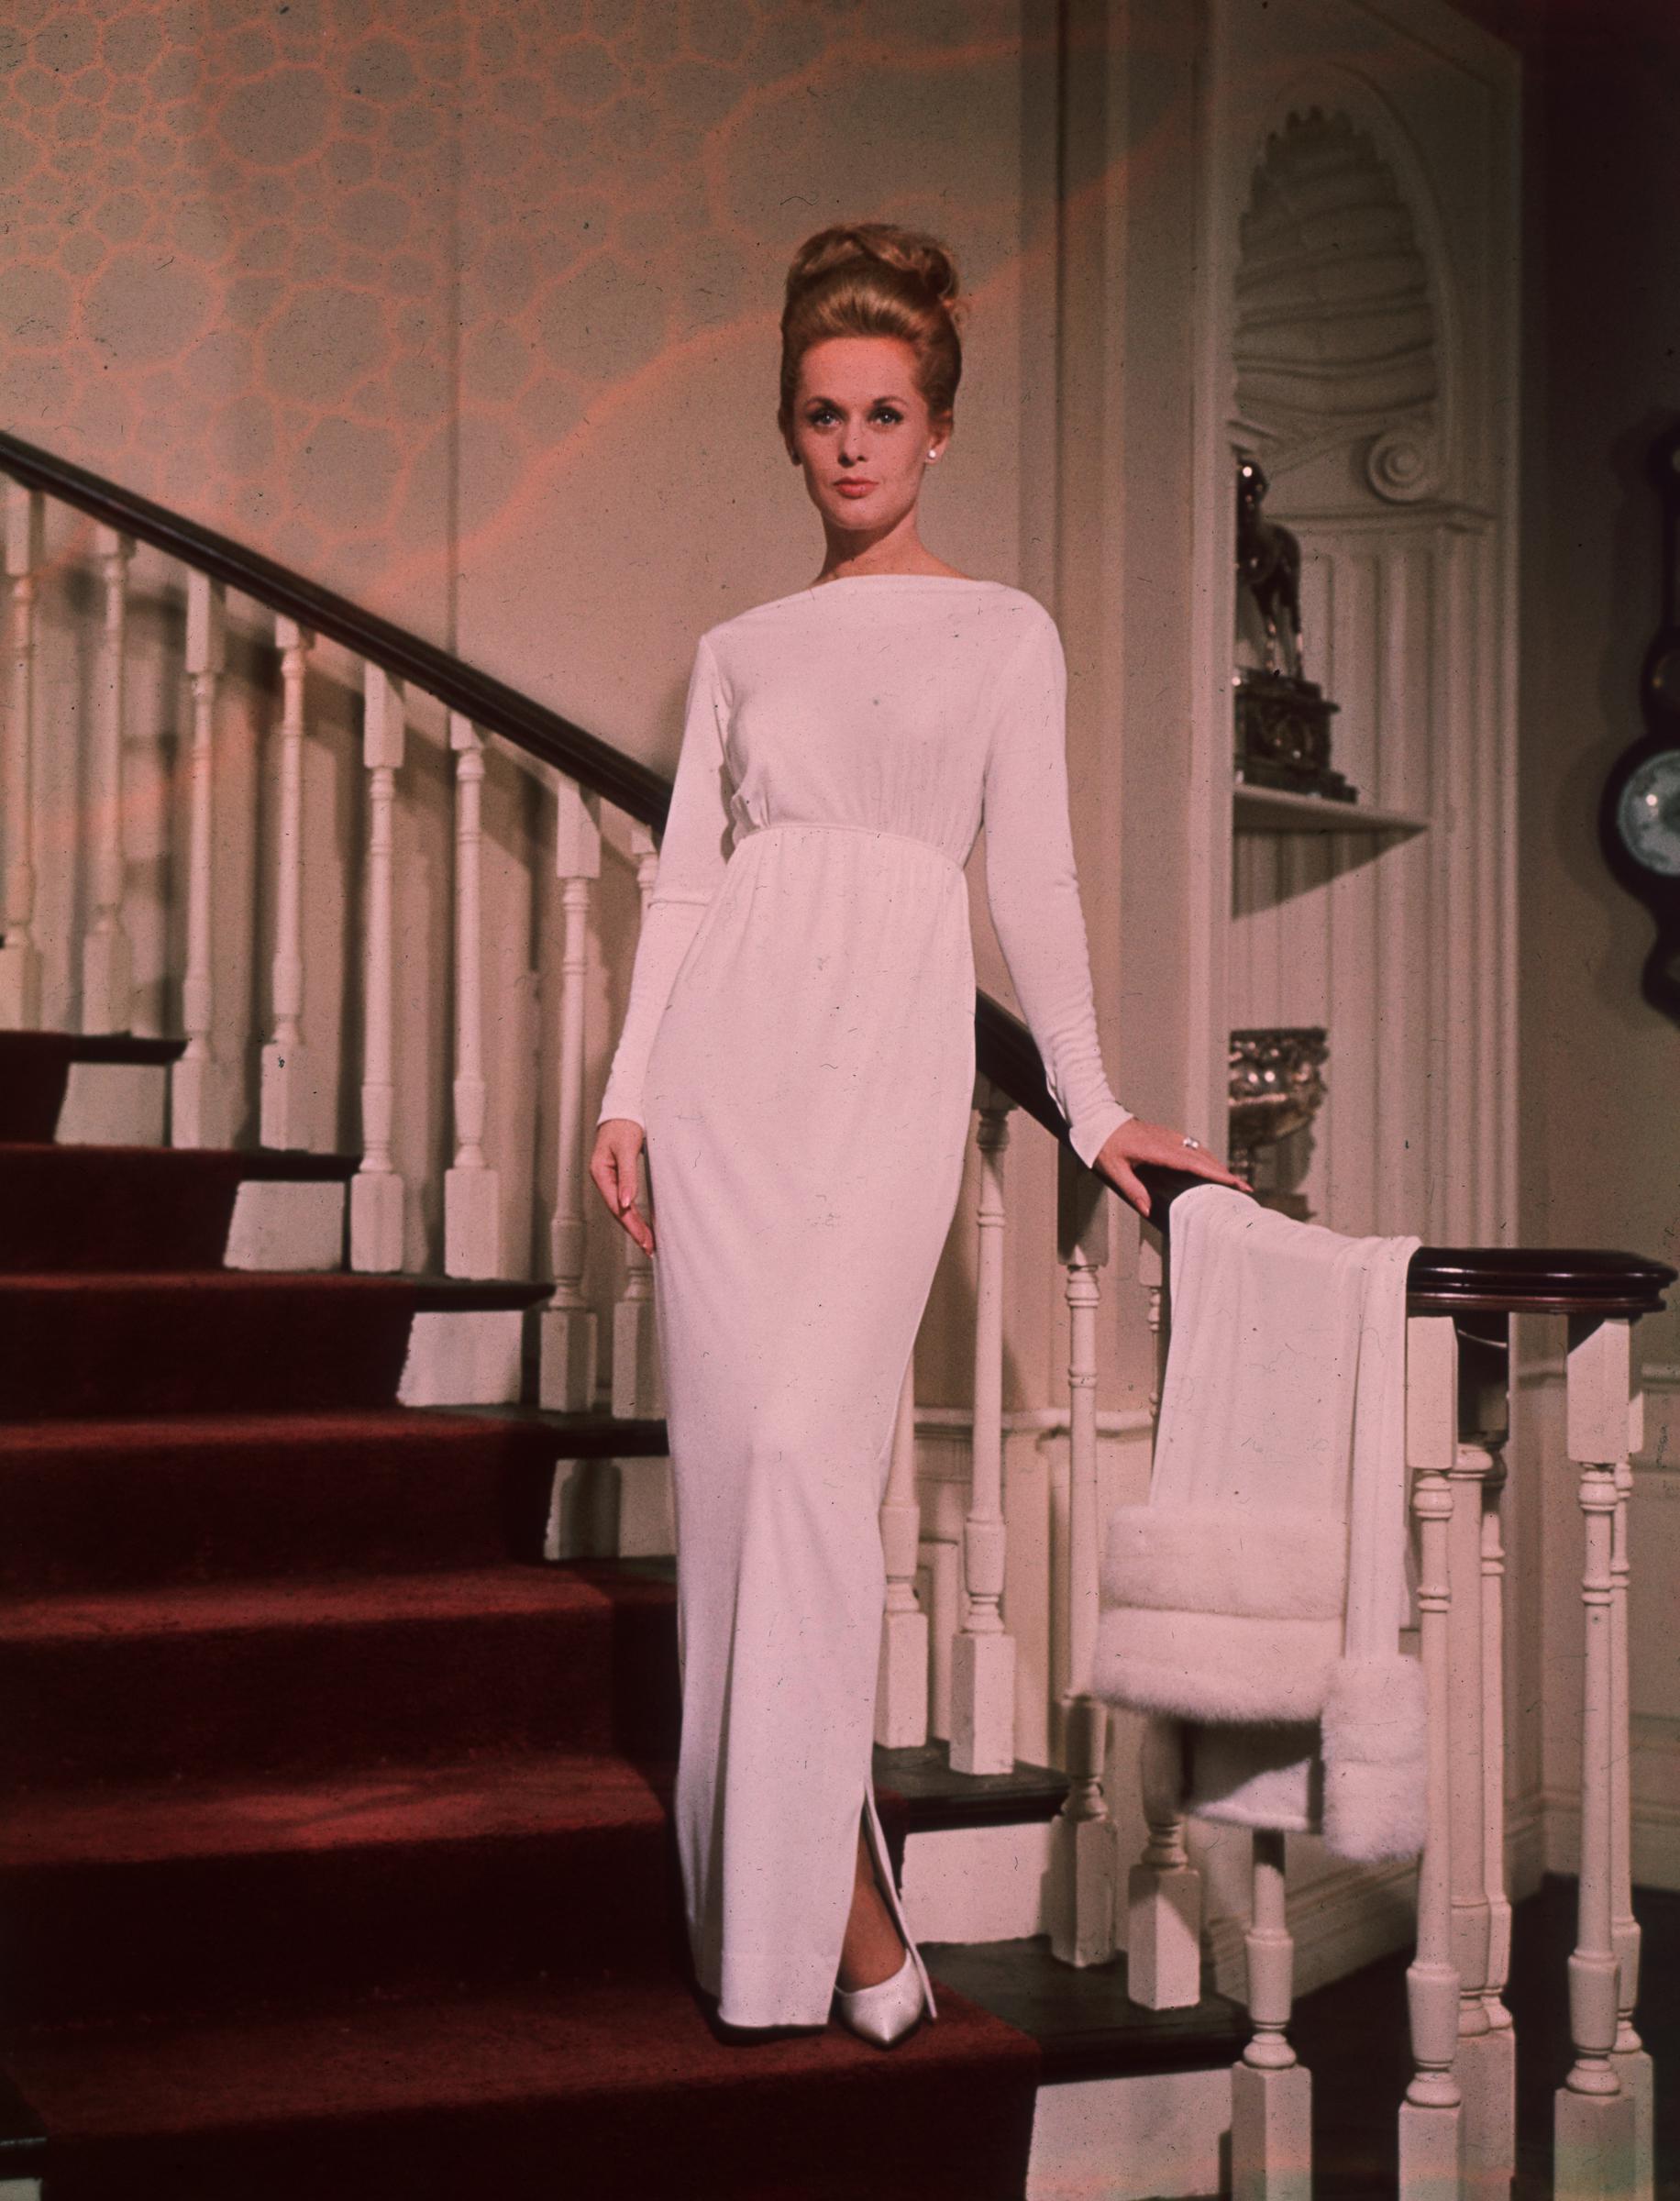 Tippi Hedren stars in the Hitchcock film "Marnie" in 1964. | Source: Getty Images